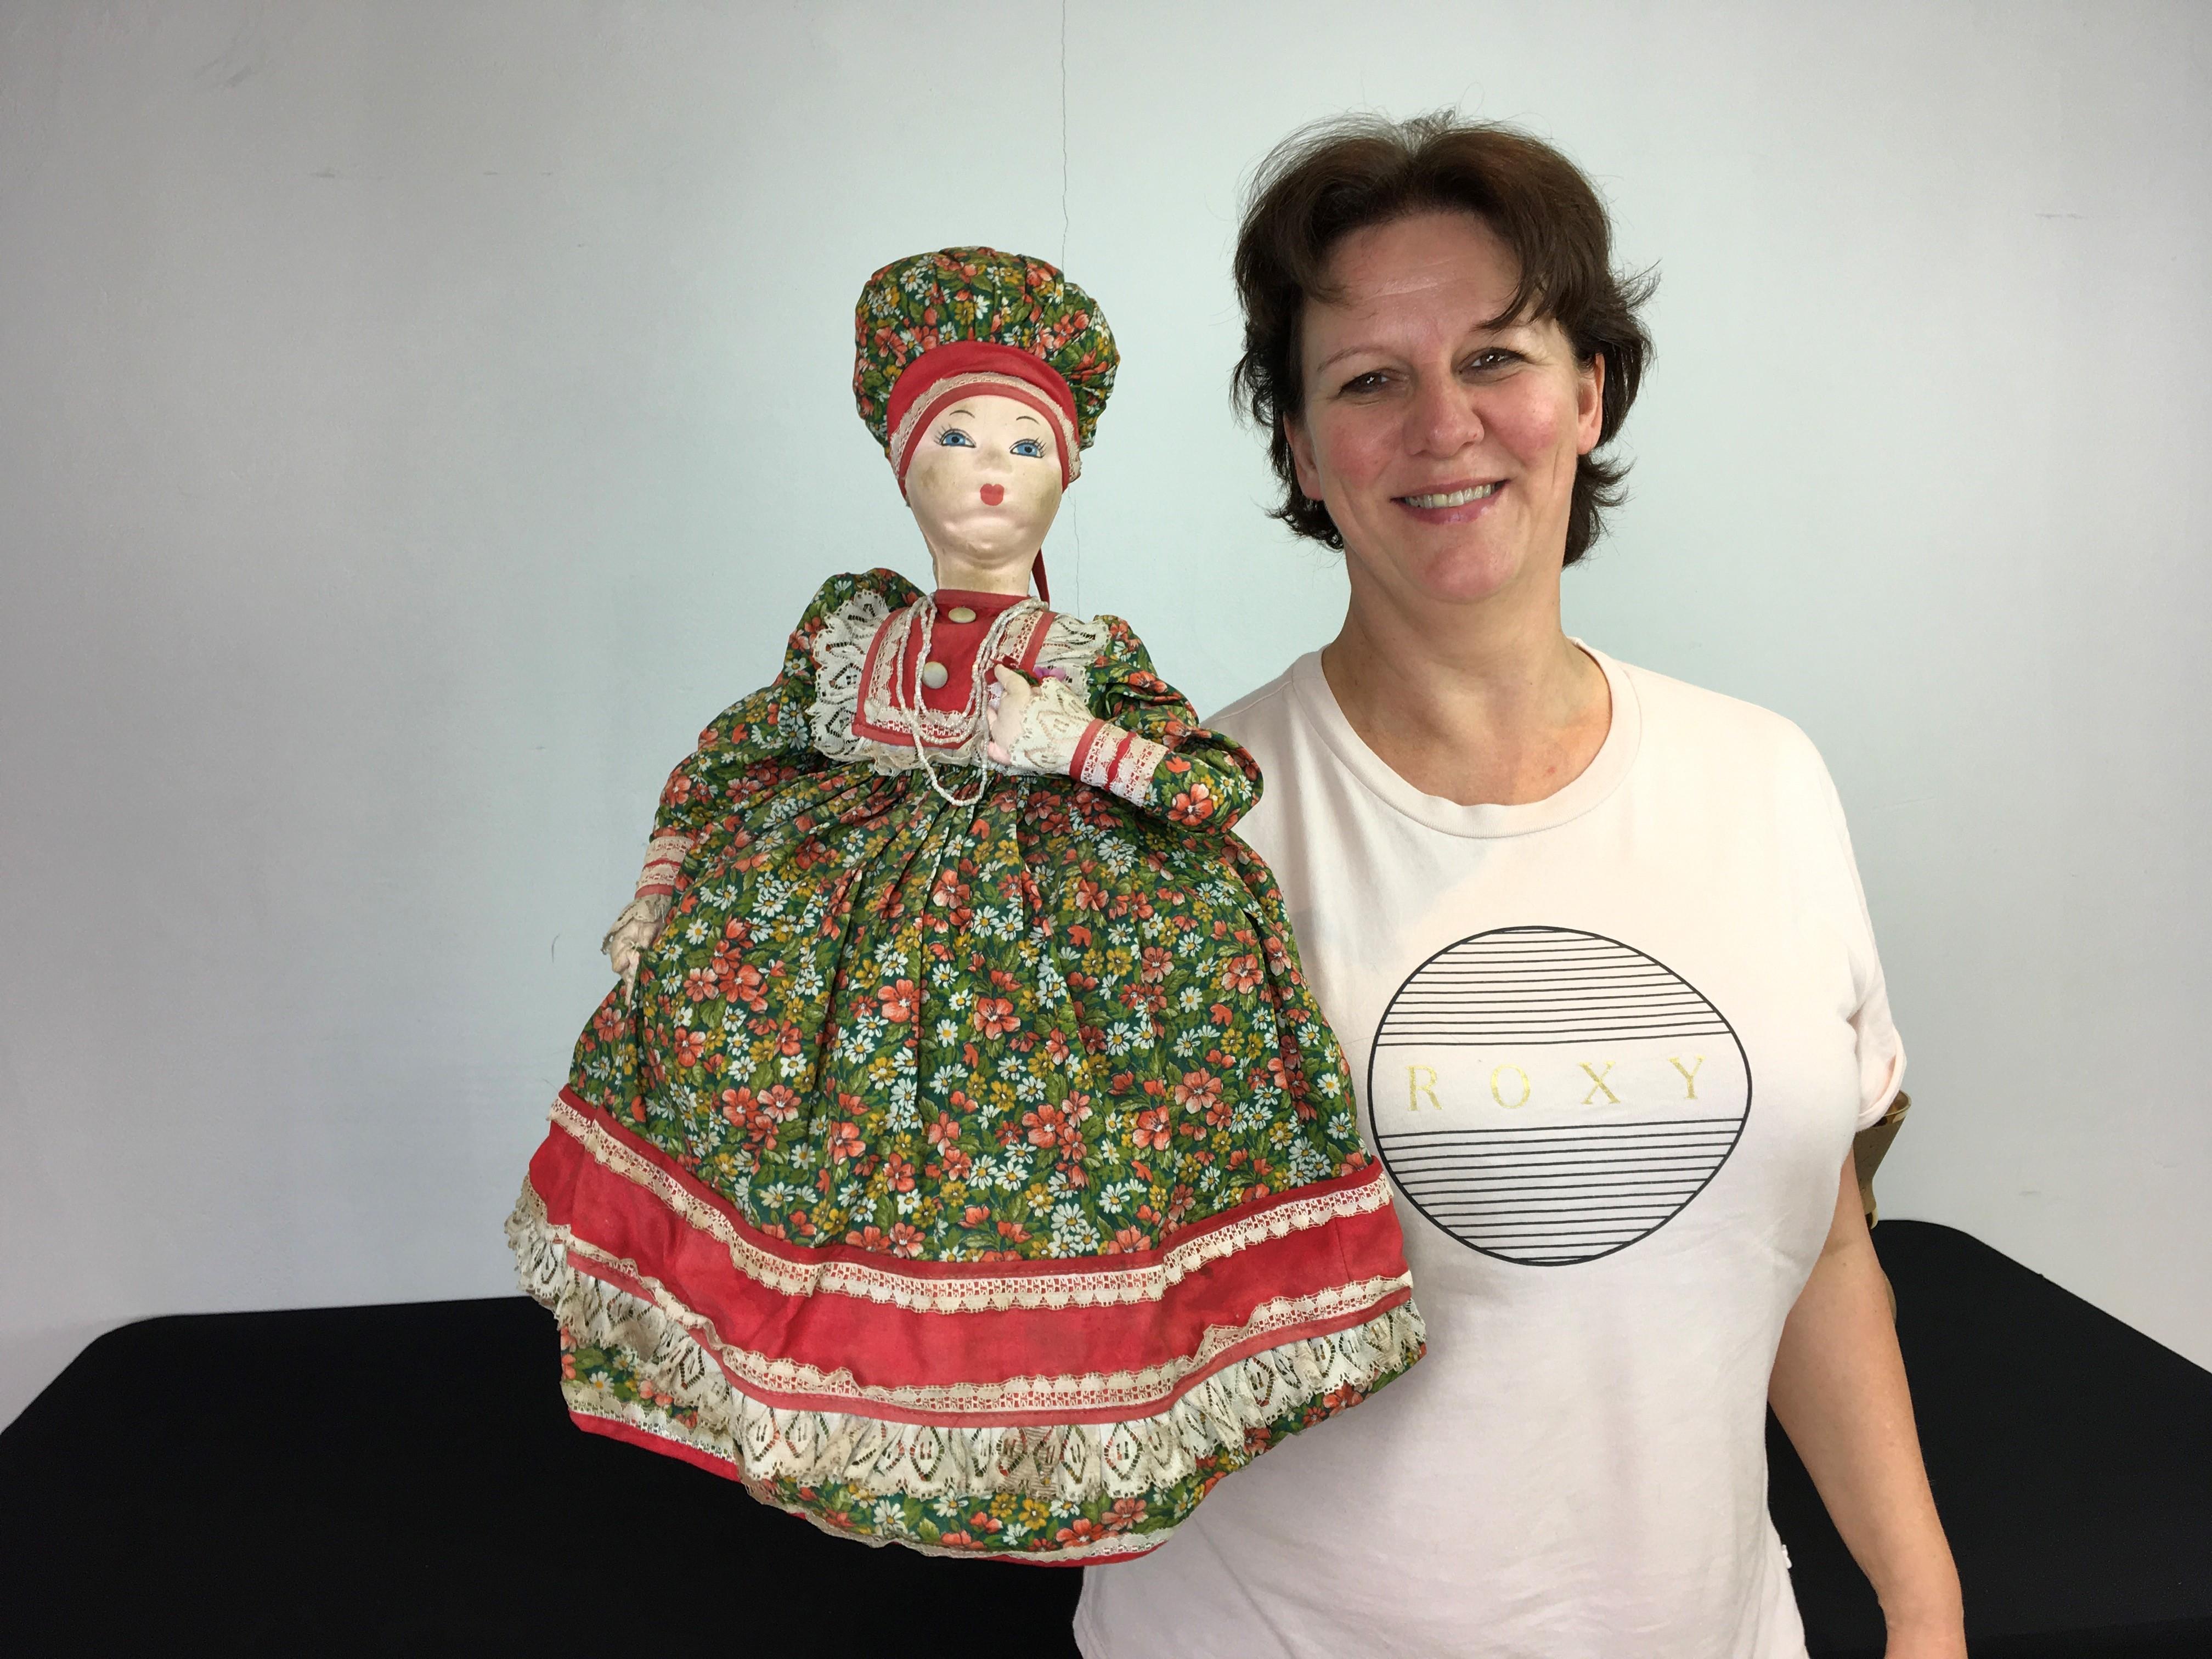 Vintage Russian samovar doll teapot cosy or samovar teapot cover. 
This large sized handmade doll has a molded fabric head with painted eyes, red lips and a large green dress with lots of flowers and lace finish. She's holding a bouquet of flowers